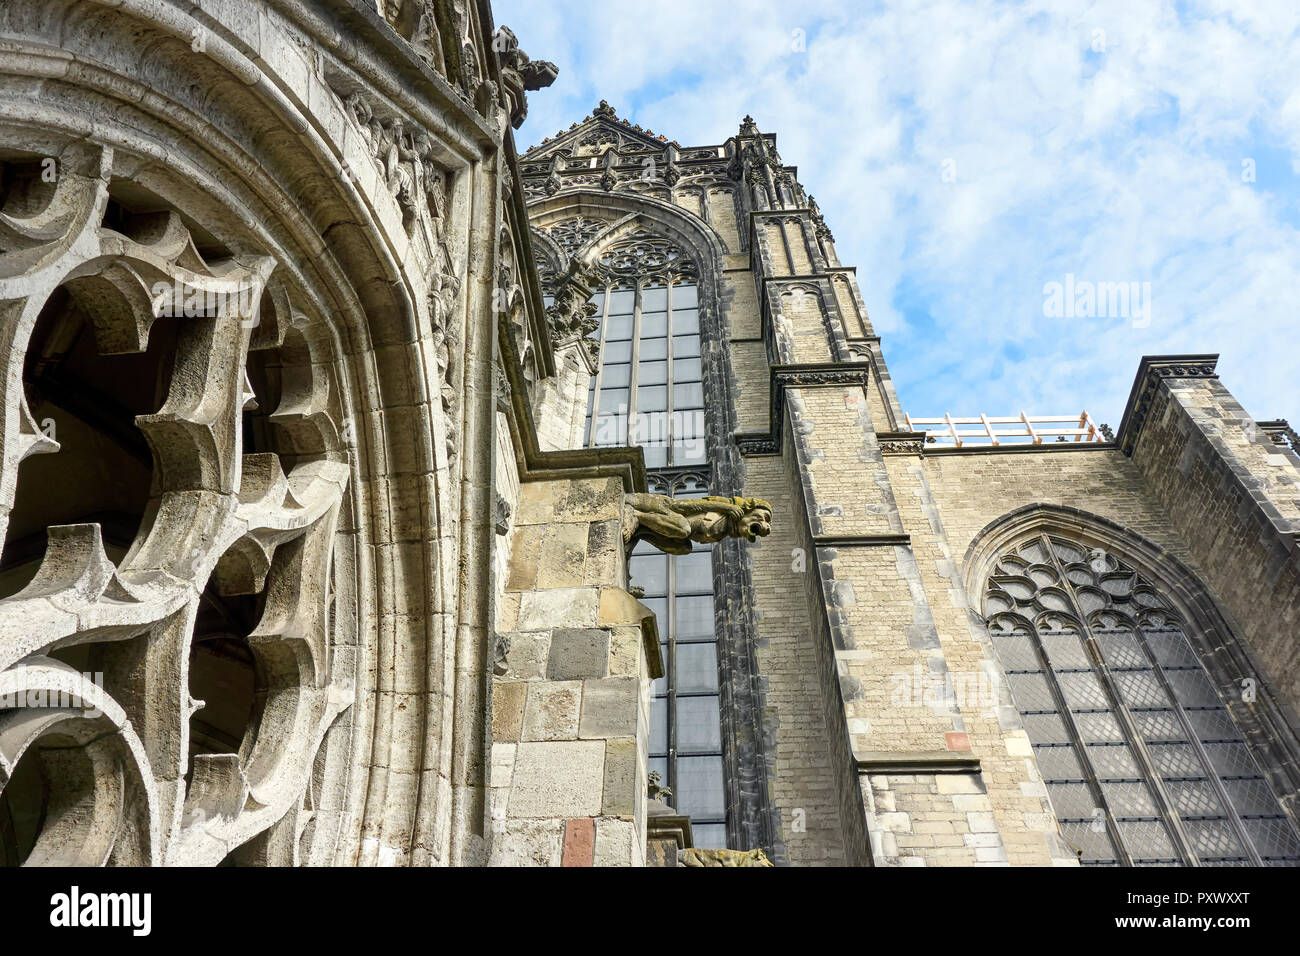 Detail of The Dom Church or St. Martin's Cathedral in Utrecht. The only pre-Reformation gothic cathedral in the Netherlands. Stock Photo